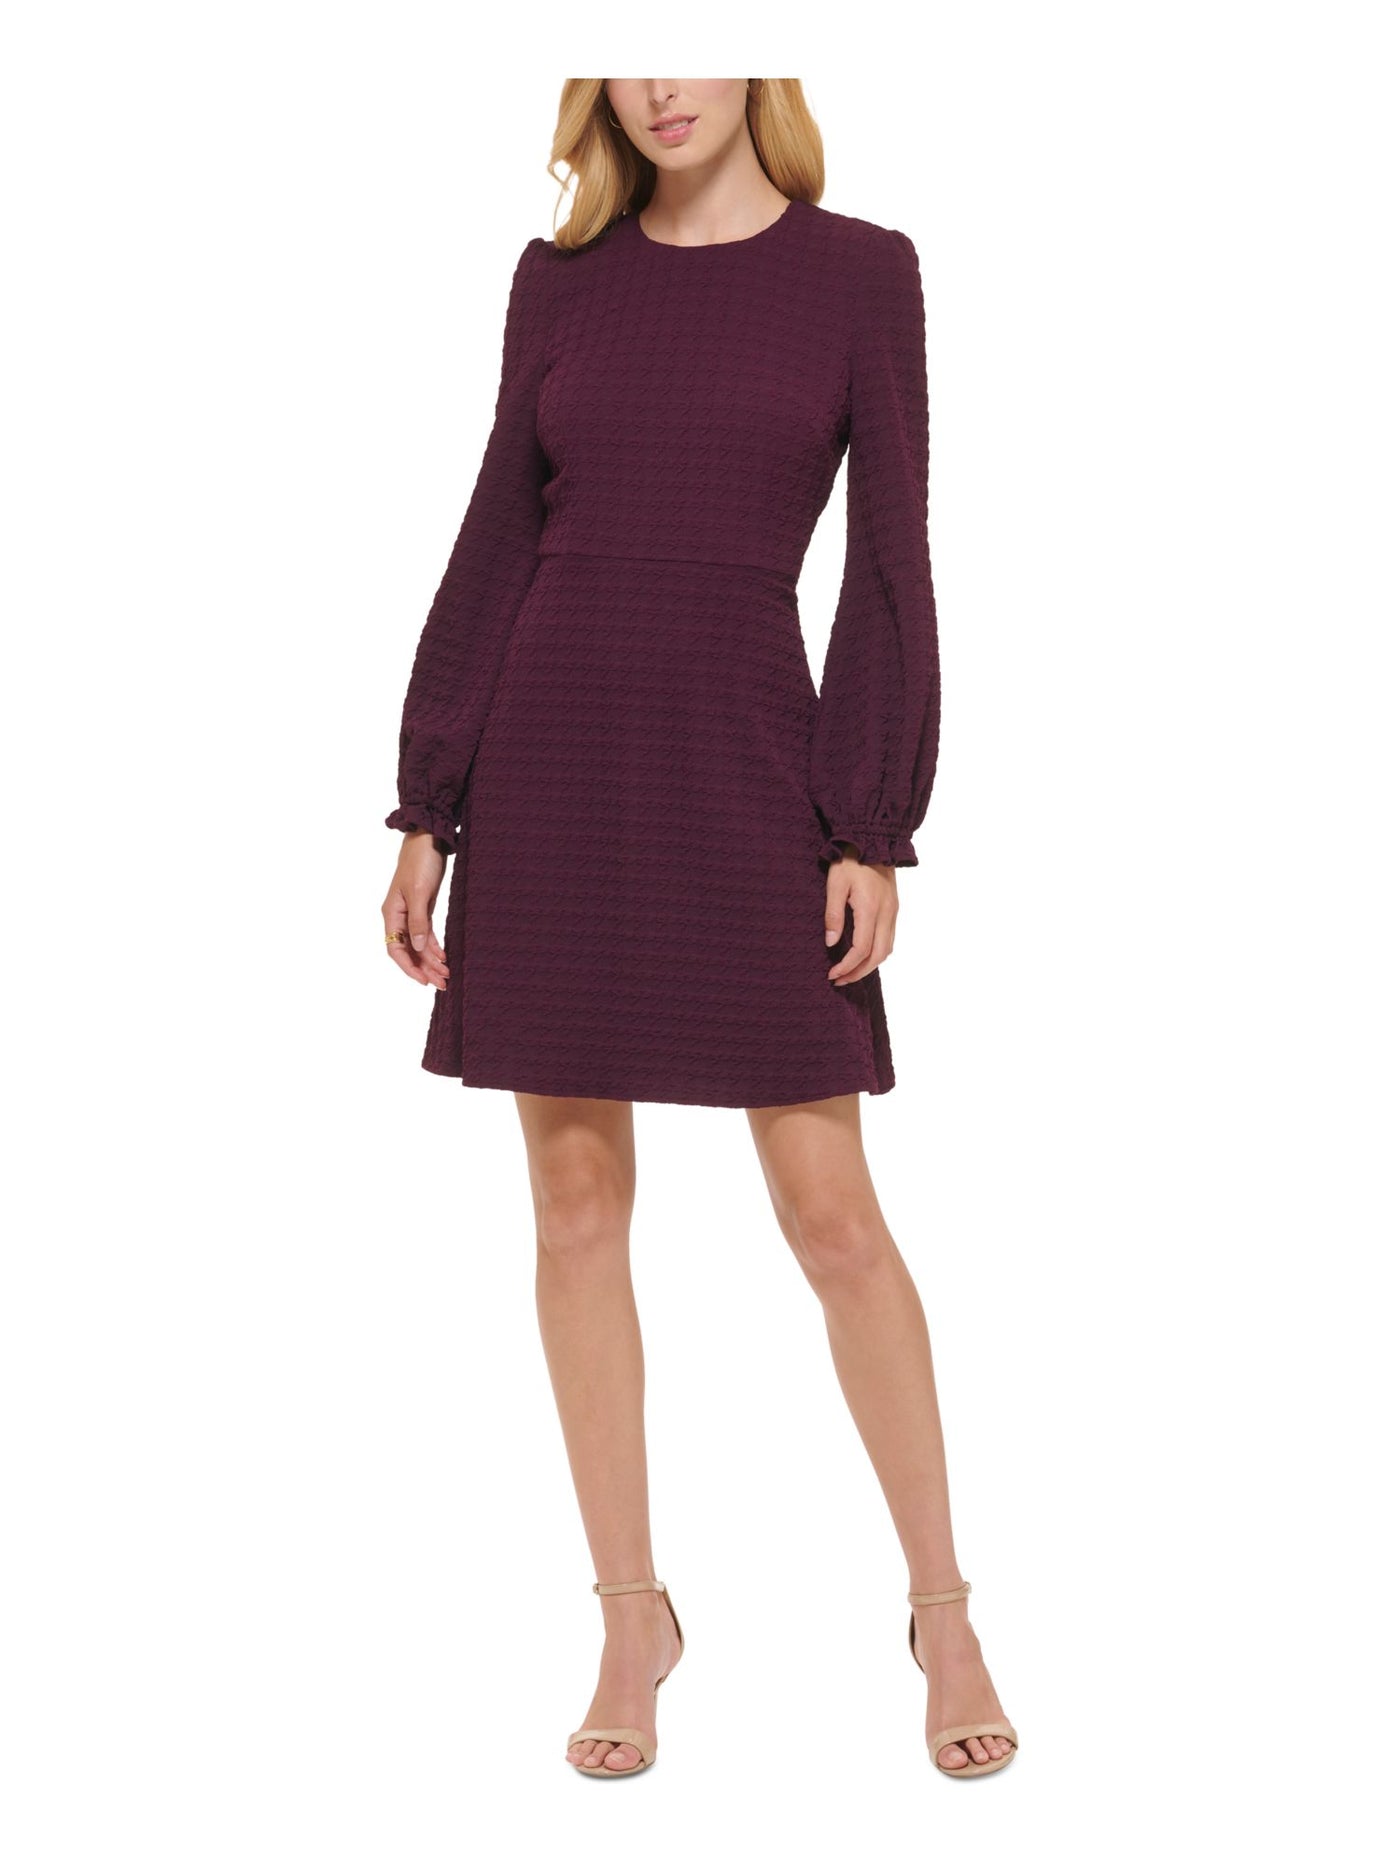 TOMMY HILFIGER Womens Purple Zippered Unlined Ruffled Textured Darted Houndstooth Long Sleeve Round Neck Above The Knee Wear To Work Fit + Flare Dress Petites 10P